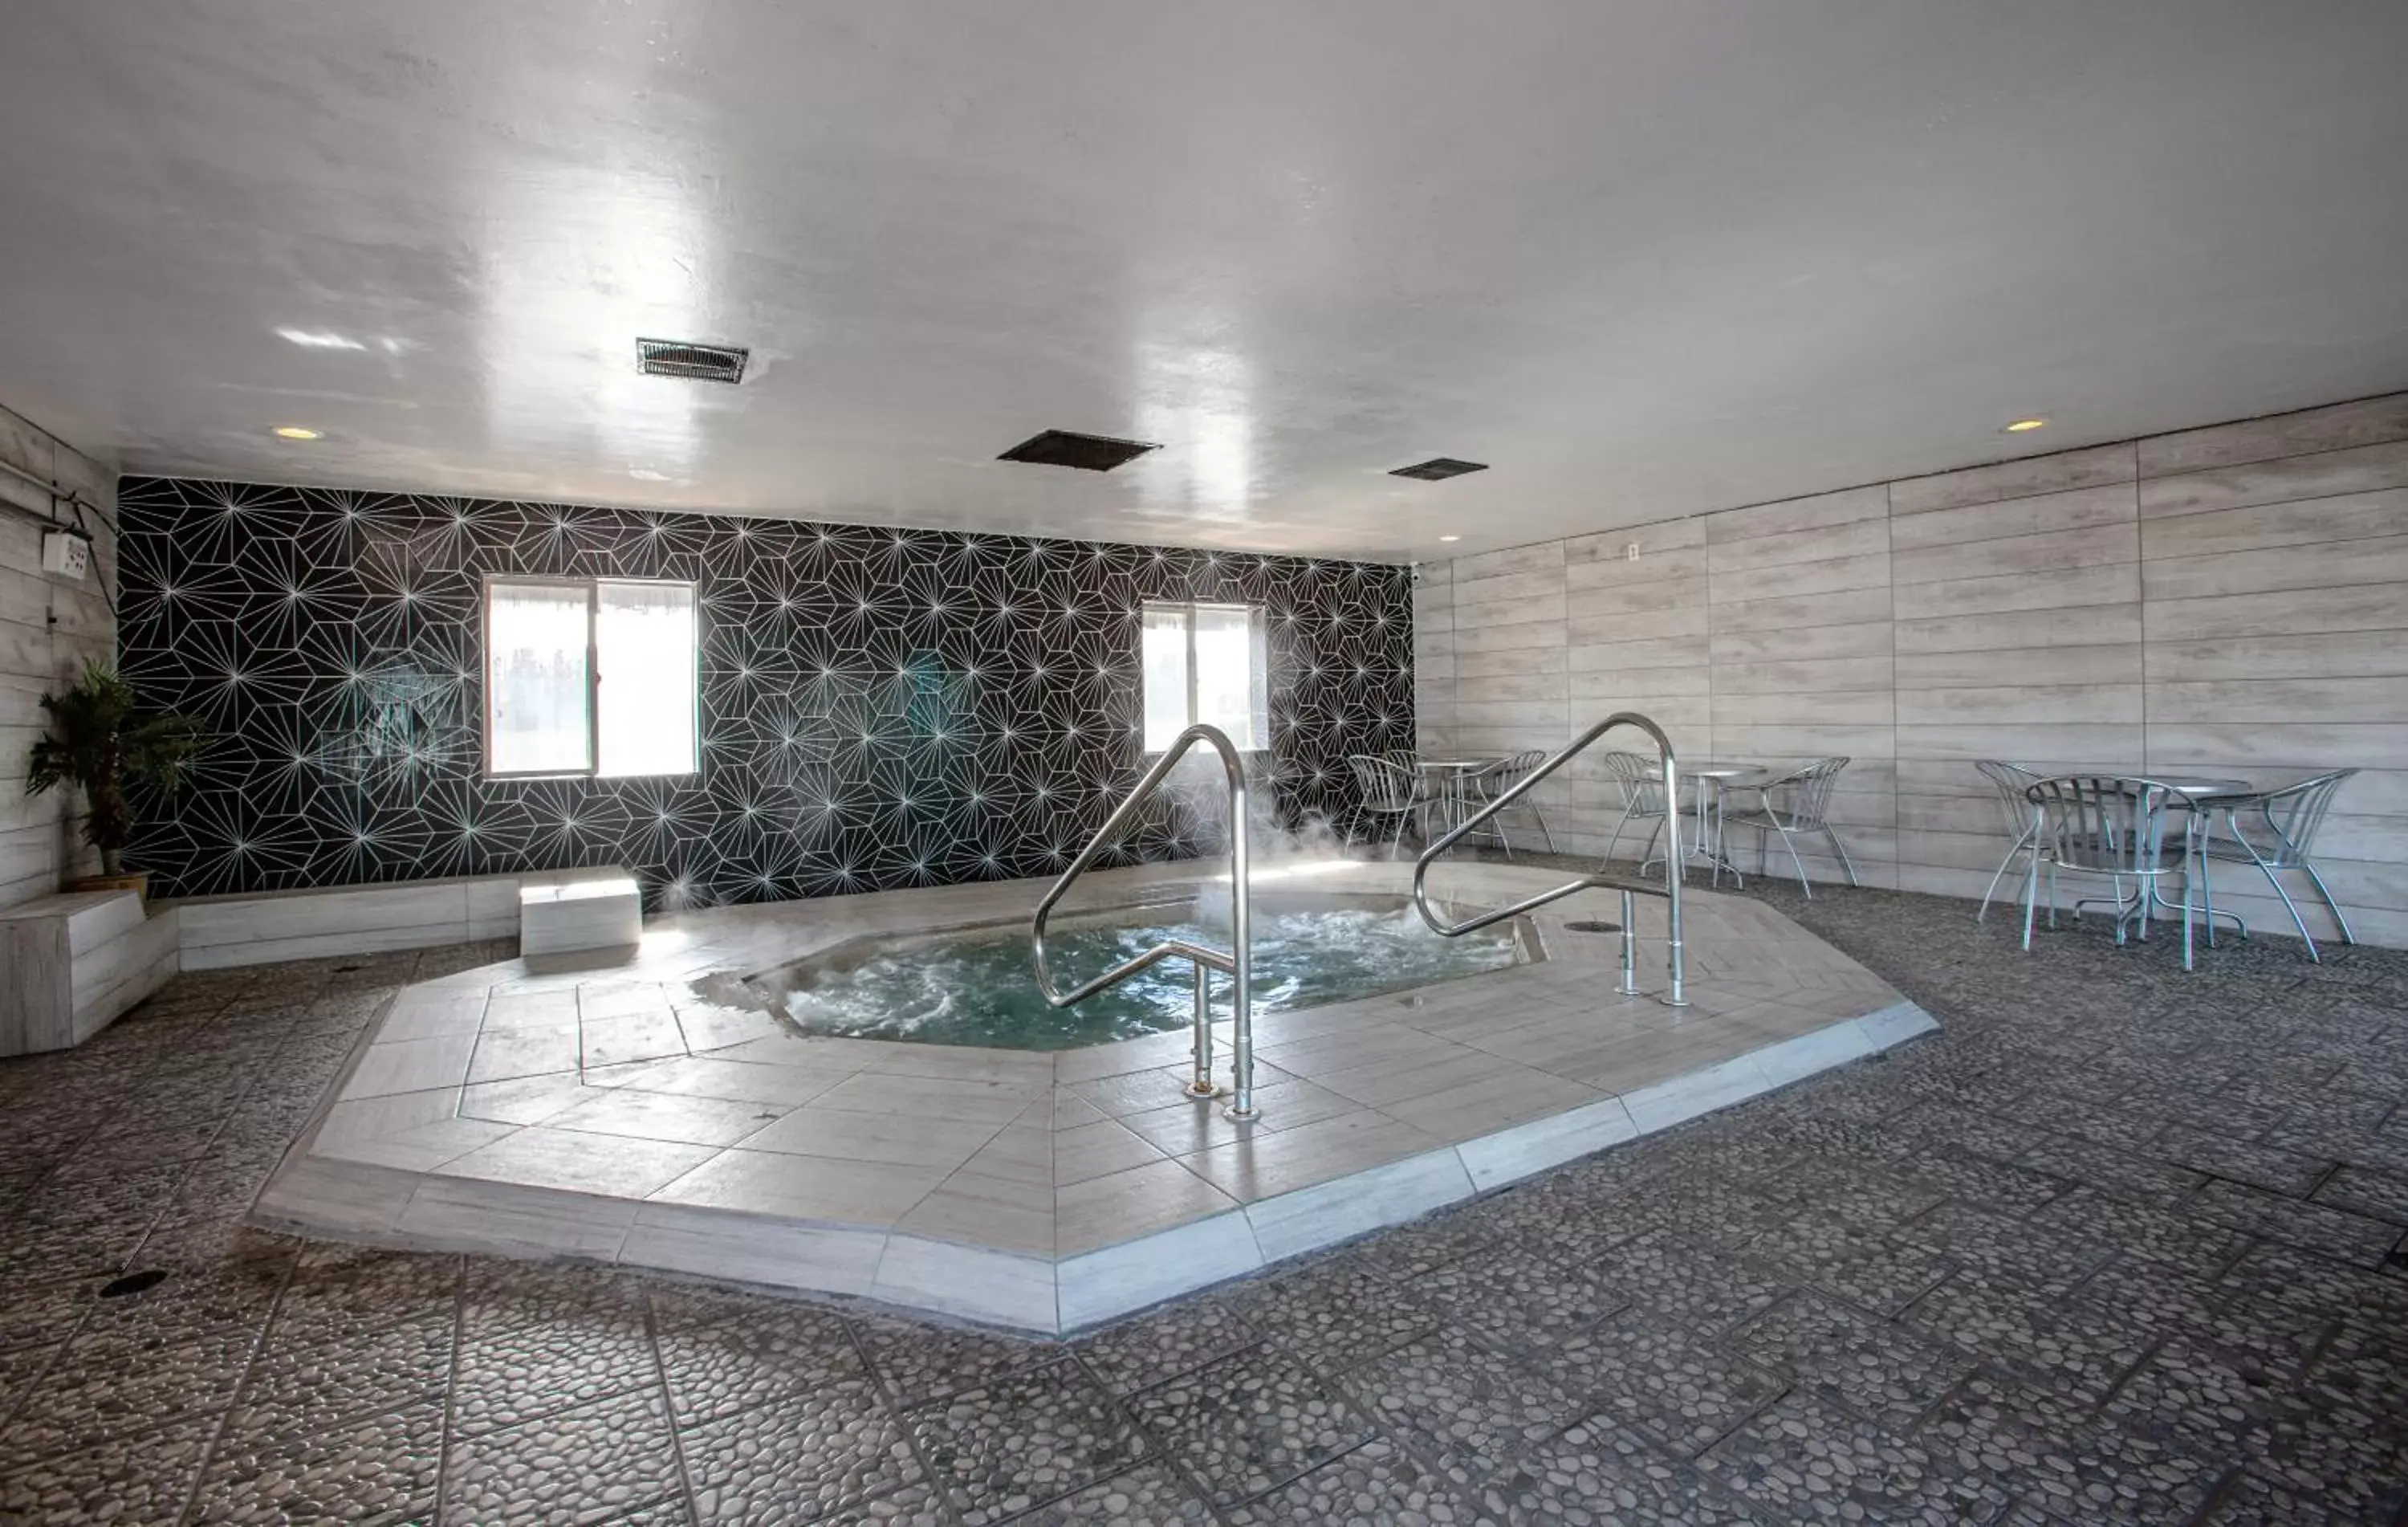 Hot Tub, Swimming Pool in Hotel Elev8 Flagstaff I-40 Exit 198 Butler Ave